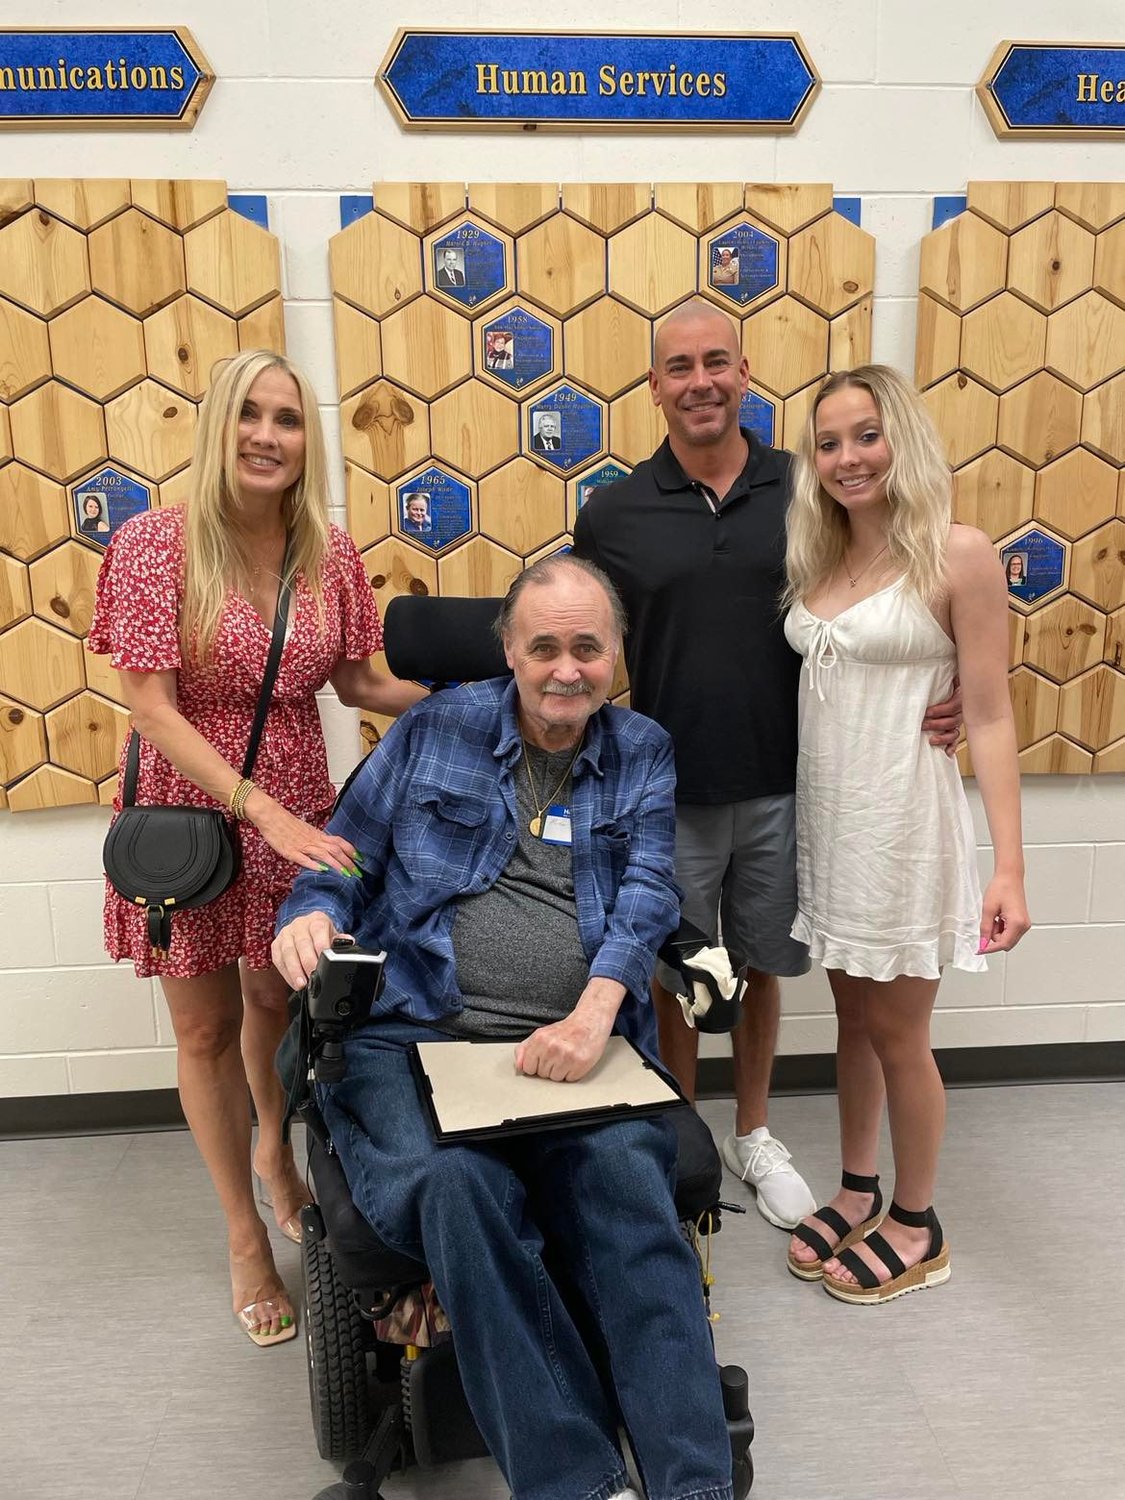 Michael Becker with his daughter Cheylene Varto, son-in-law Robert Varto and granddaughter Kira Varto in front of the Wall of Fame at HHS.